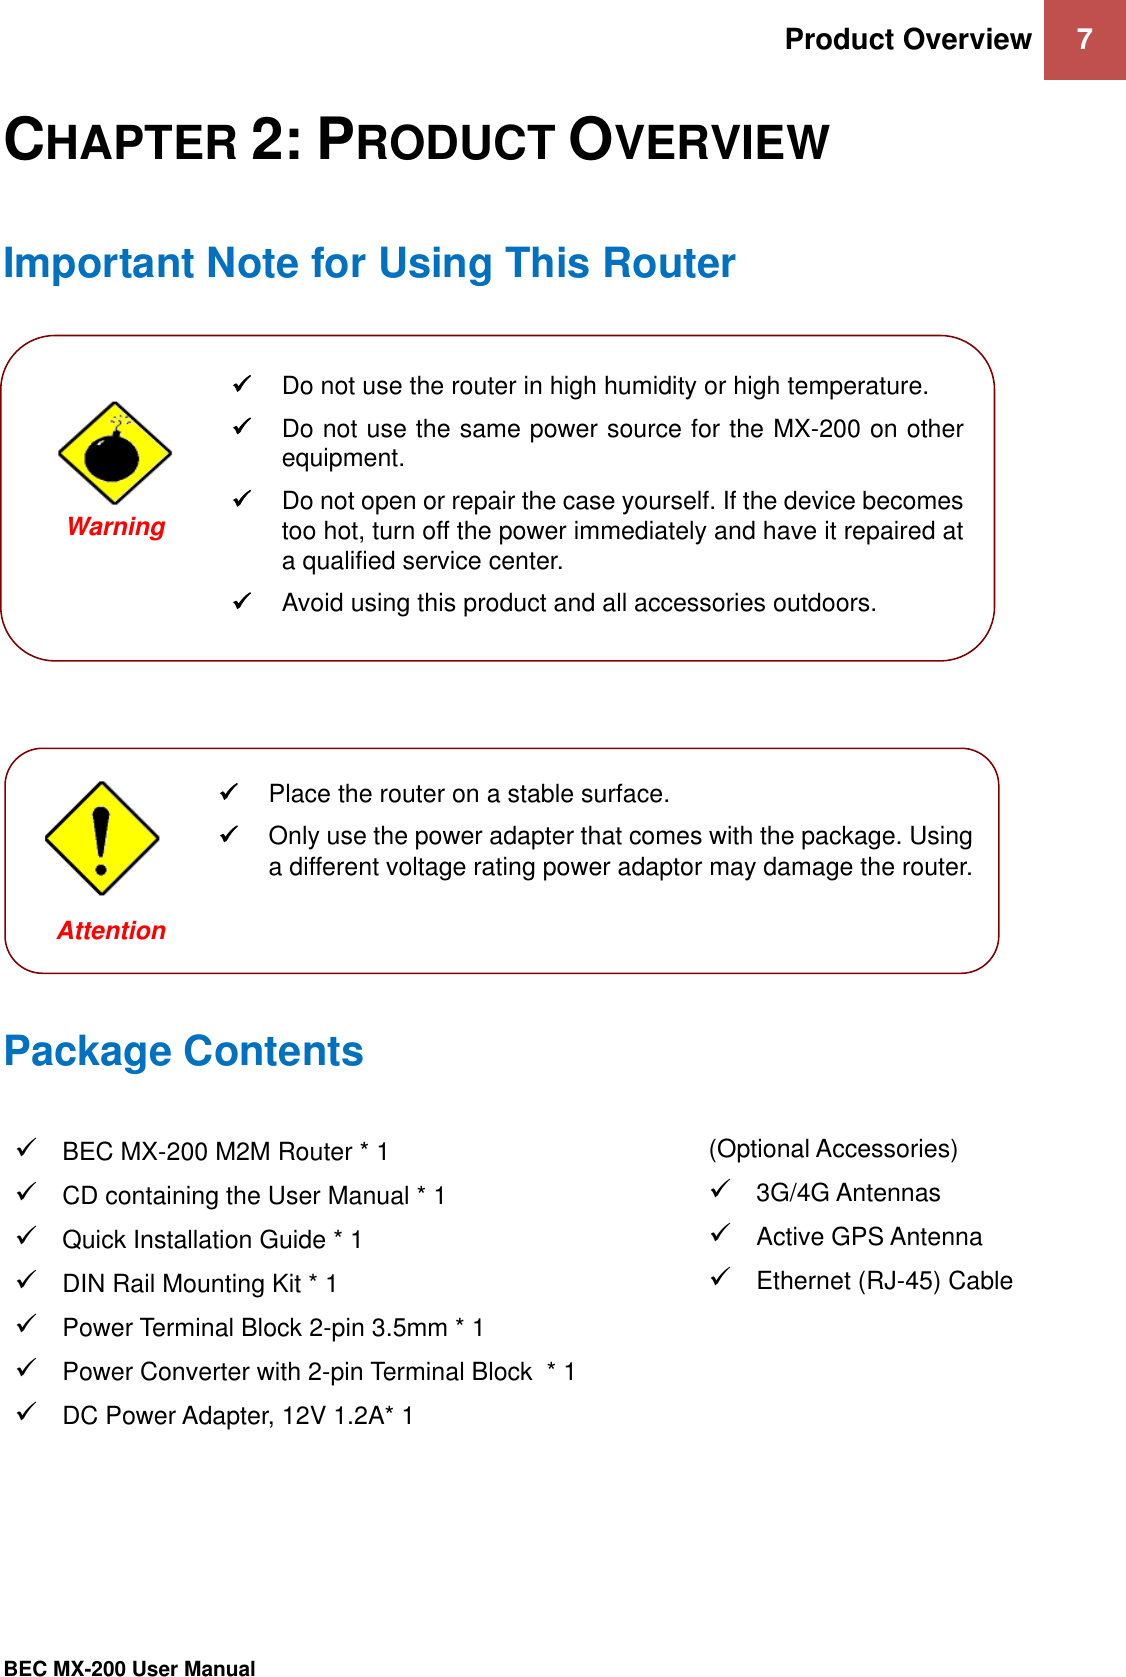 Product Overview 7   BEC MX-200 User Manual  CHAPTER 2: PRODUCT OVERVIEW Important Note for Using This Router                 Package Contents  BEC MX-200 M2M Router * 1  CD containing the User Manual * 1  Quick Installation Guide * 1  DIN Rail Mounting Kit * 1  Power Terminal Block 2-pin 3.5mm * 1   Power Converter with 2-pin Terminal Block  * 1   DC Power Adapter, 12V 1.2A* 1 (Optional Accessories)   3G/4G Antennas  Active GPS Antenna   Ethernet (RJ-45) Cable     Do not use the router in high humidity or high temperature.  Do not use the same power source for the MX-200 on other equipment.  Do not open or repair the case yourself. If the device becomes too hot, turn off the power immediately and have it repaired at a qualified service center.   Avoid using this product and all accessories outdoors.   Warning   Place the router on a stable surface.  Only use the power adapter that comes with the package. Using a different voltage rating power adaptor may damage the router.  Attention 